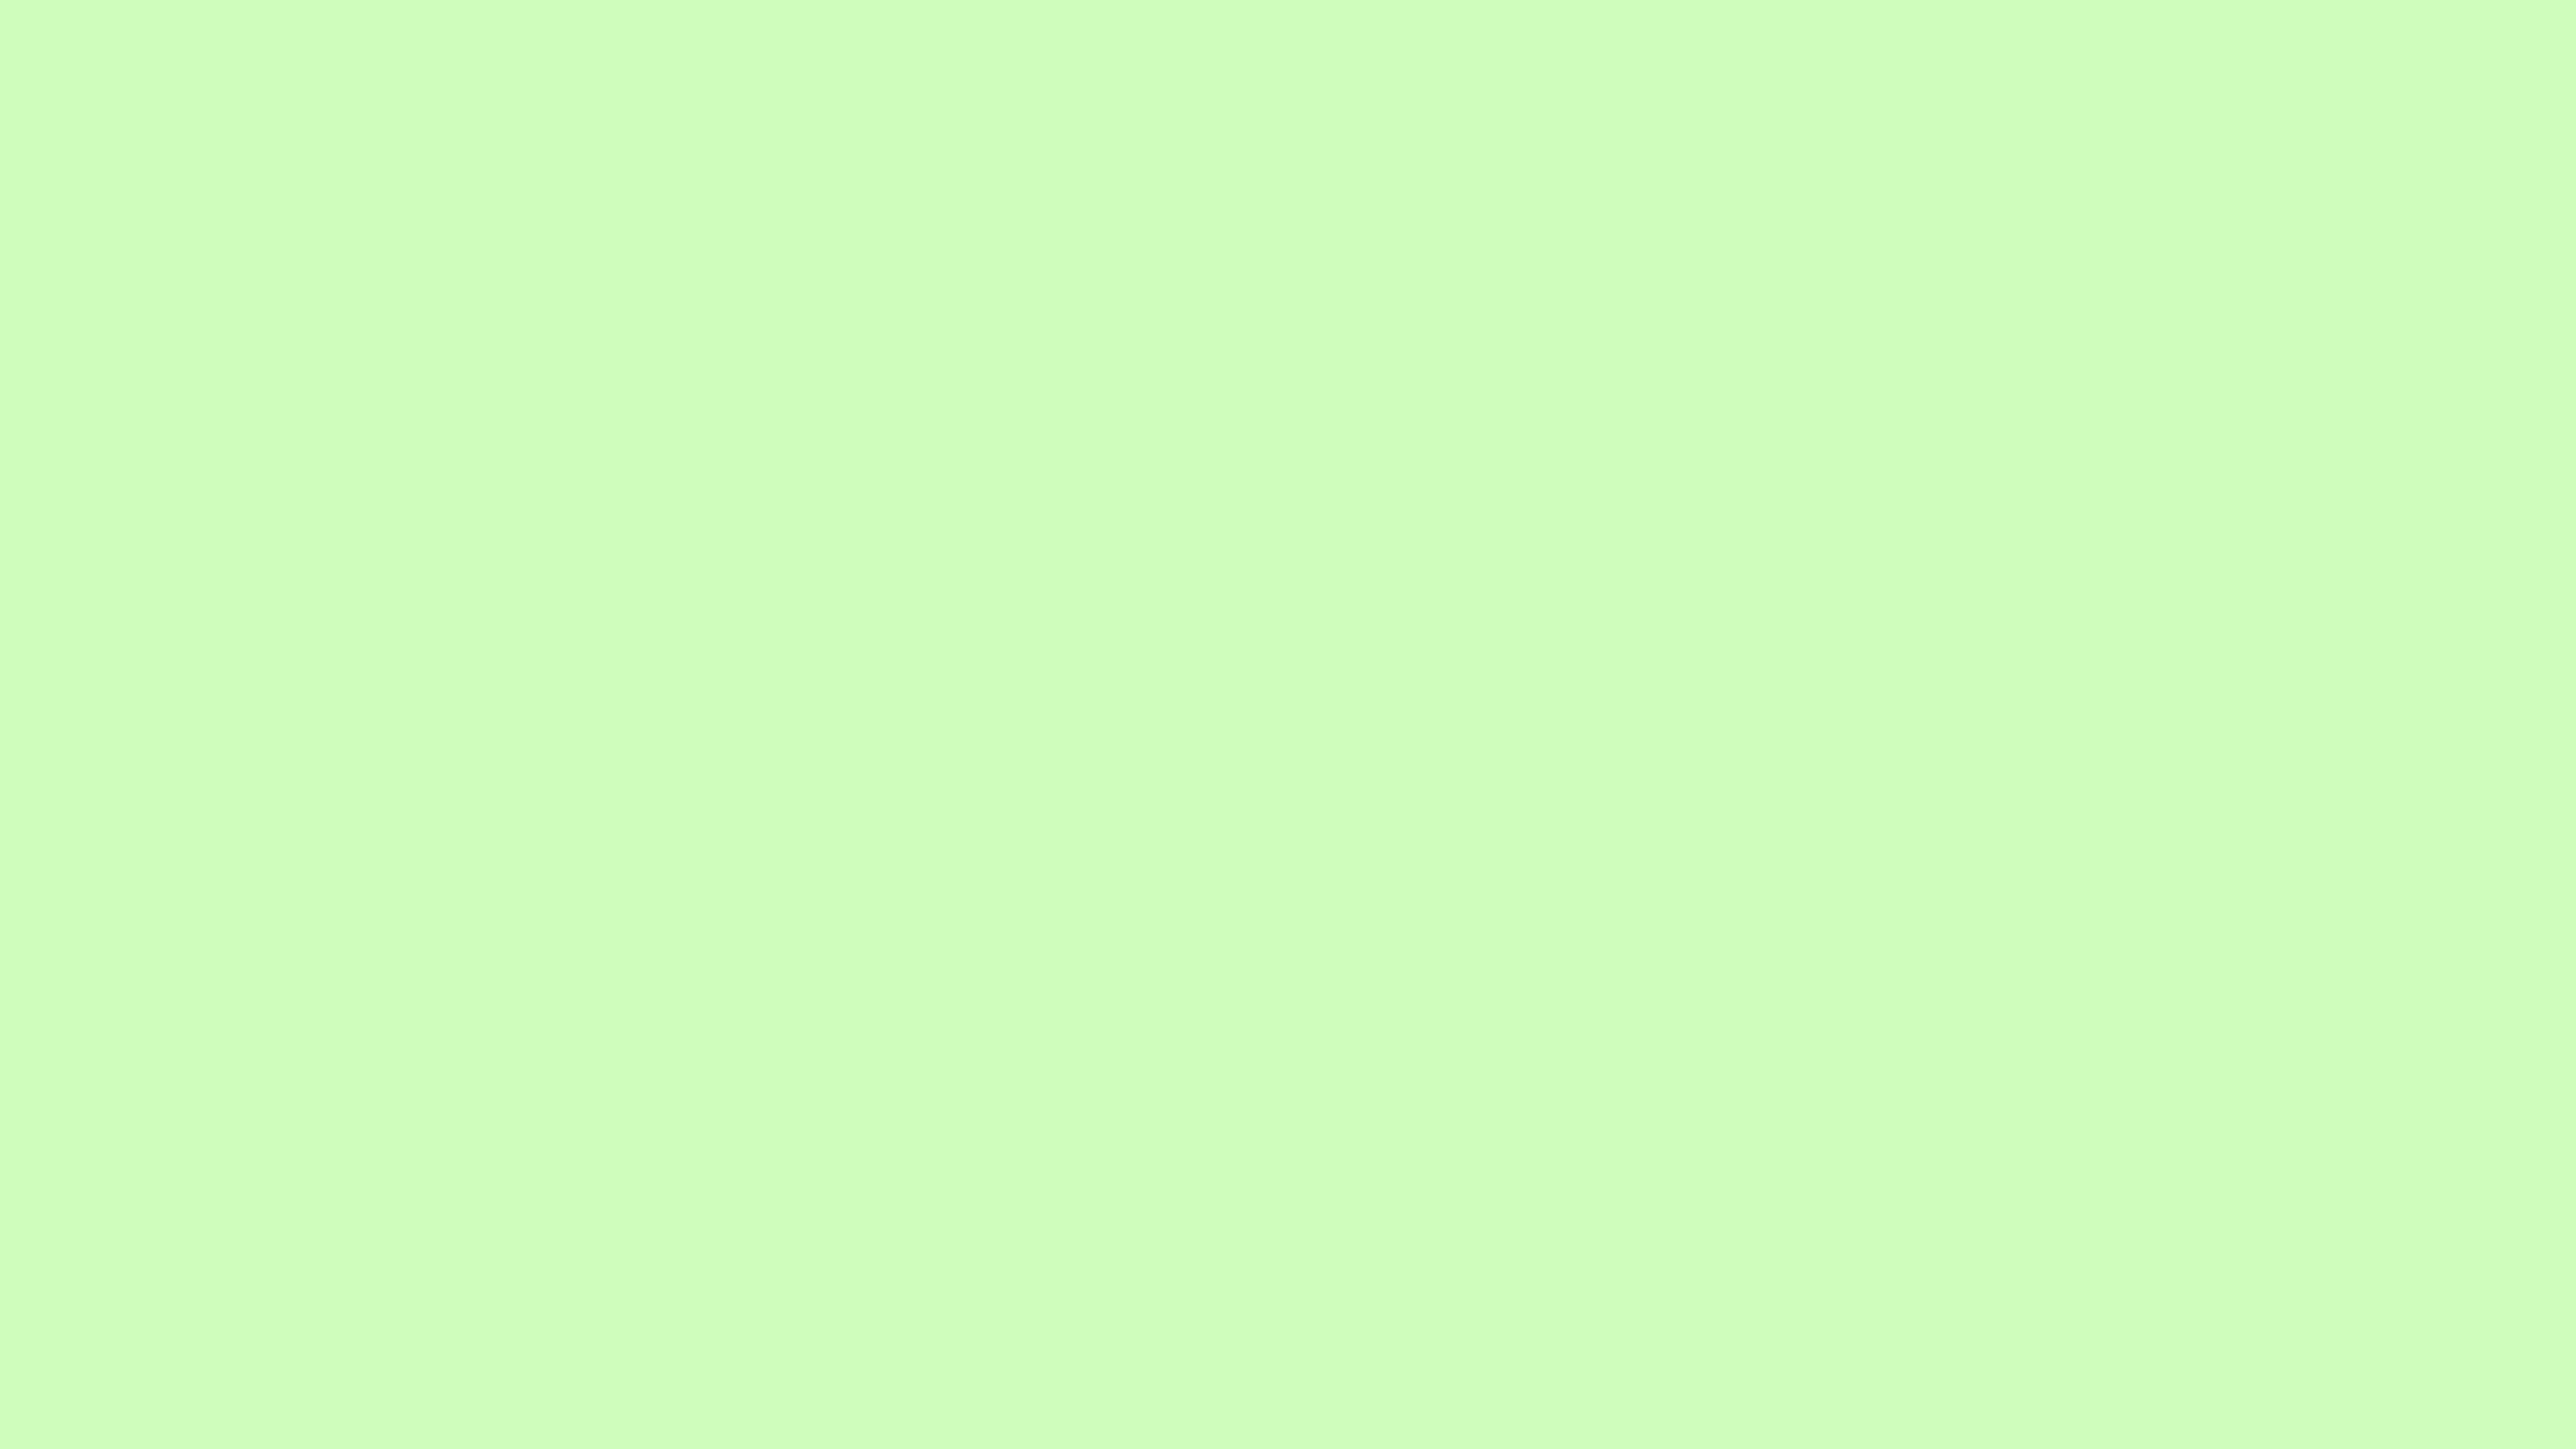 Very Pale Green Solid Color Background Image Free Image Generator